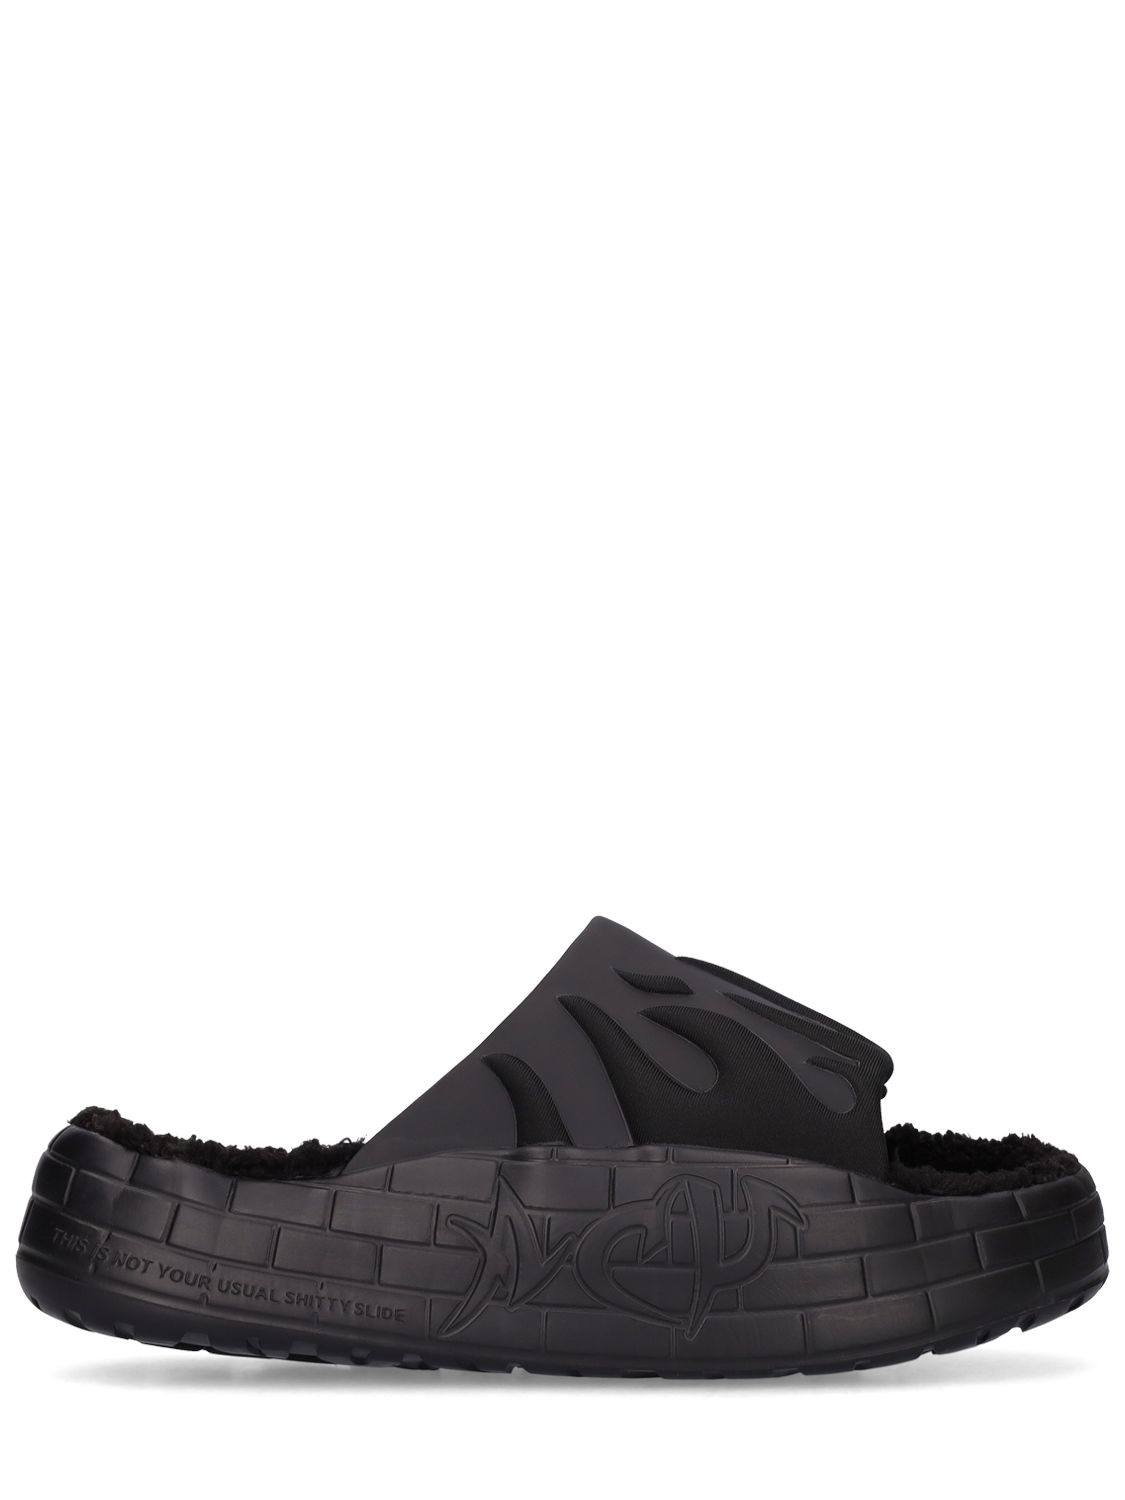 Acupuncture Nyu Flames Rubber Slide Sandals In Black